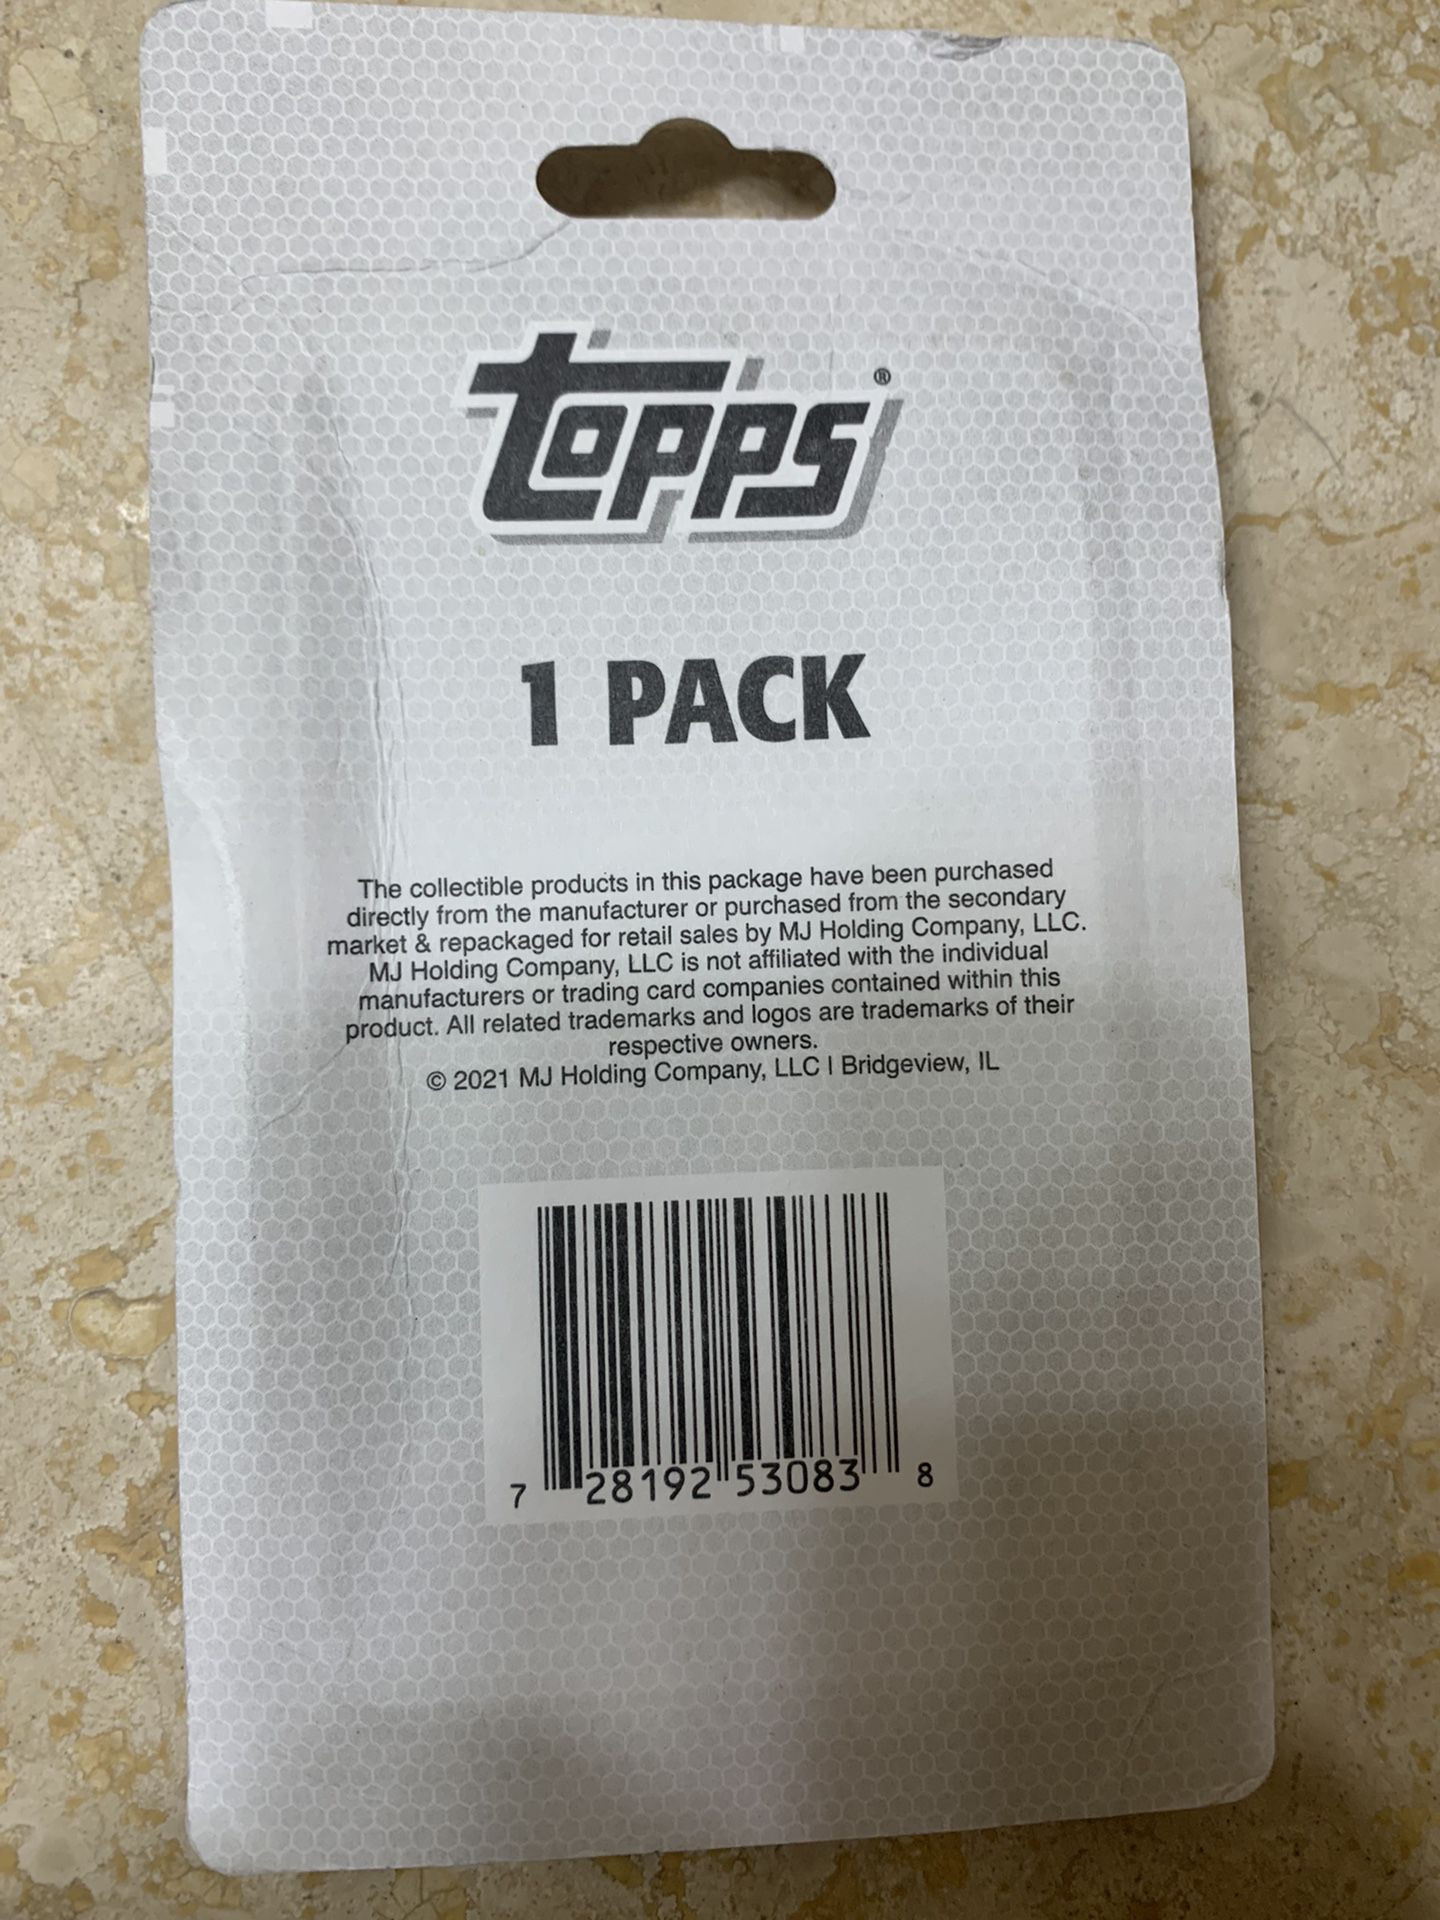 2021 Topps Series 2 Cards New Package Never Open 